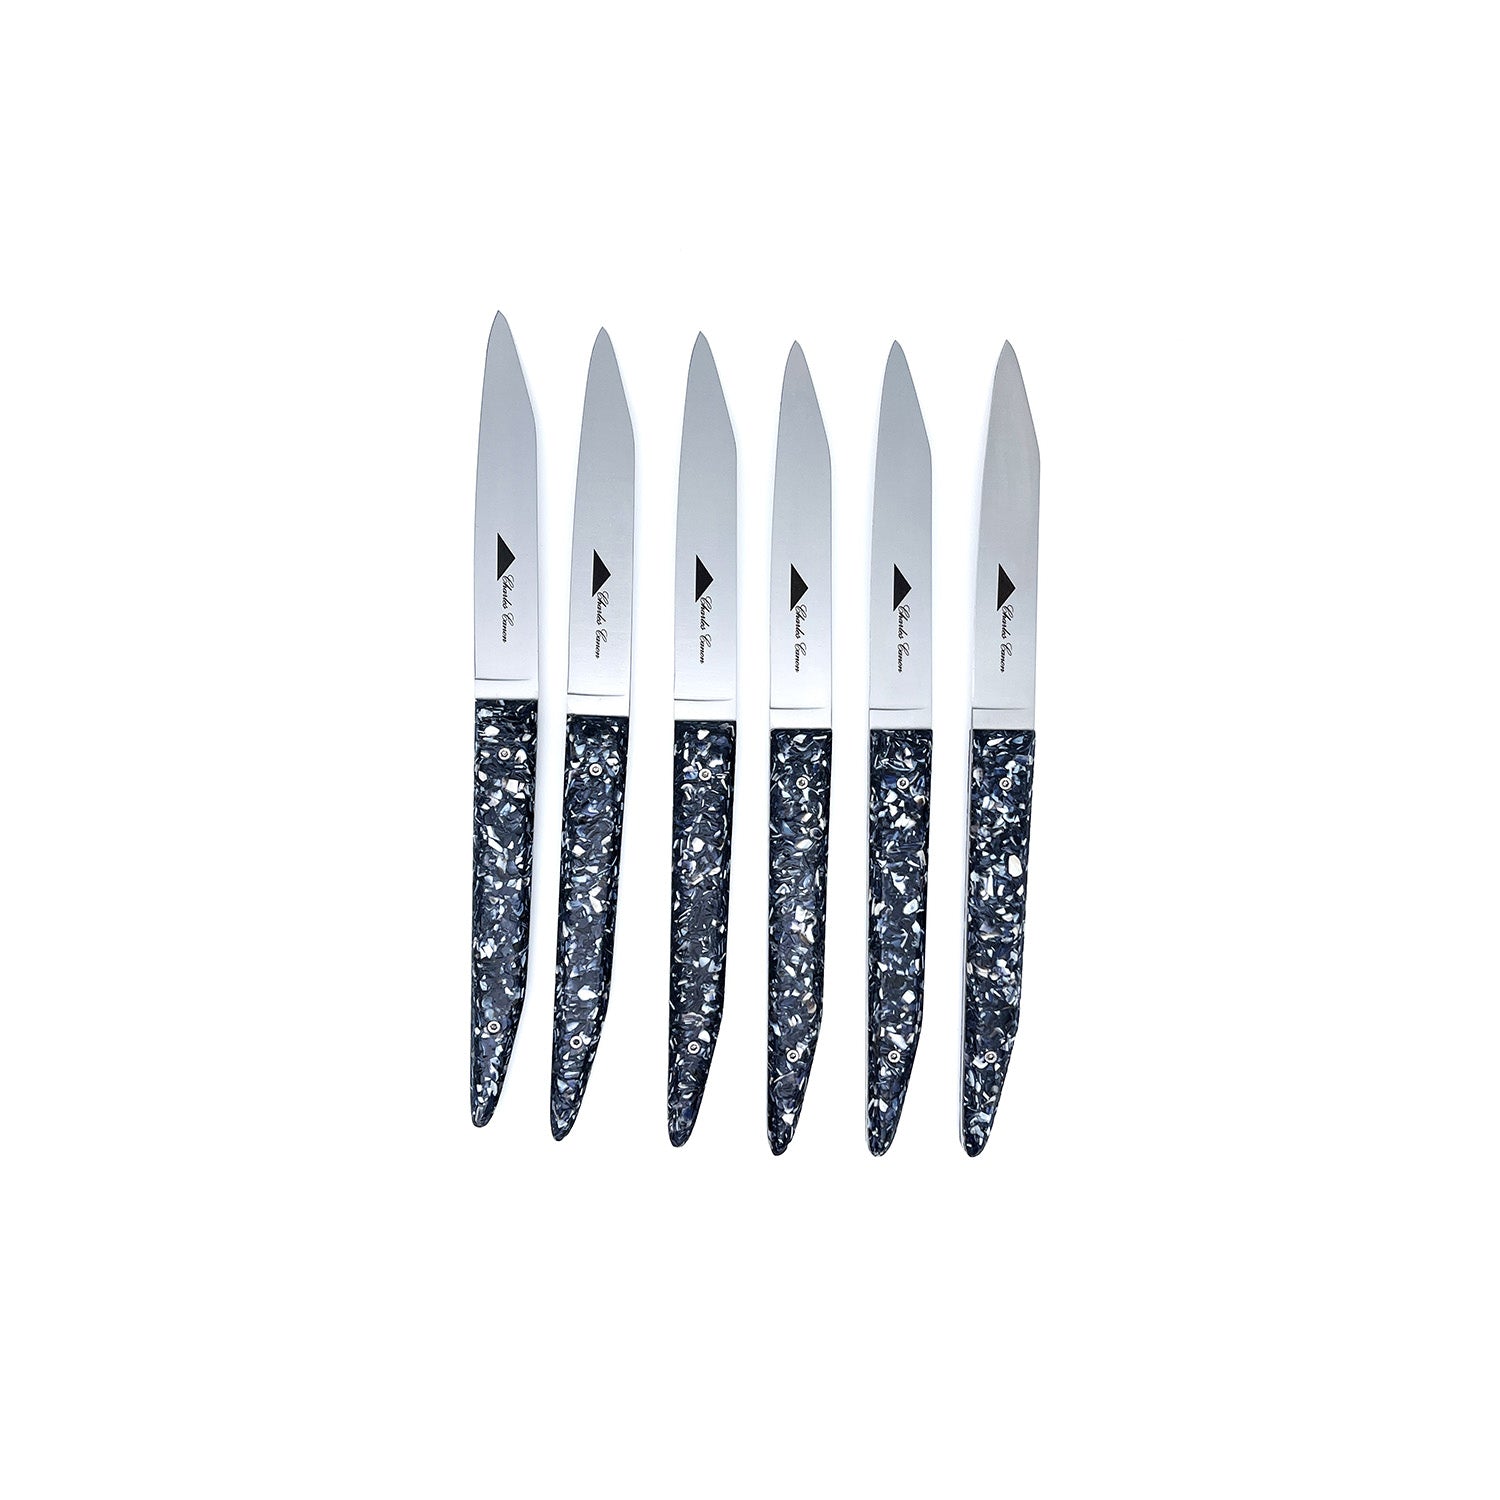 6 table knives with handles made from recycled mussel shells